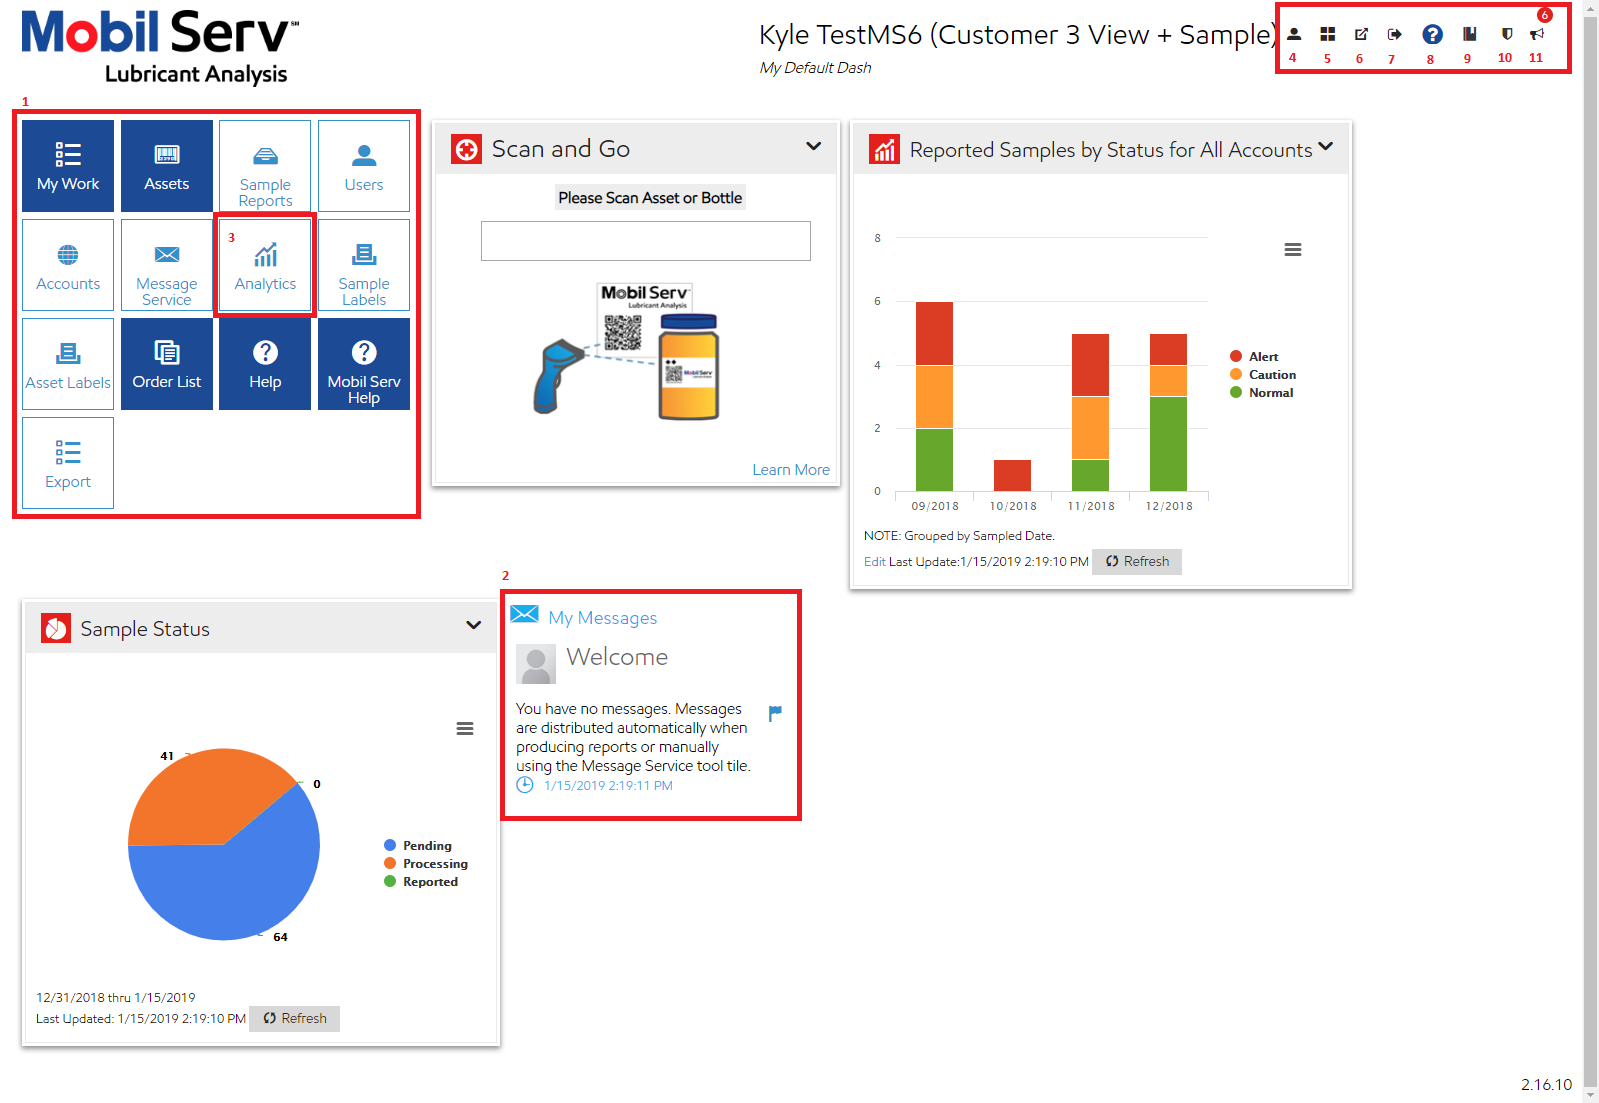 A typical example of a Mobil Serv user's dashboard.